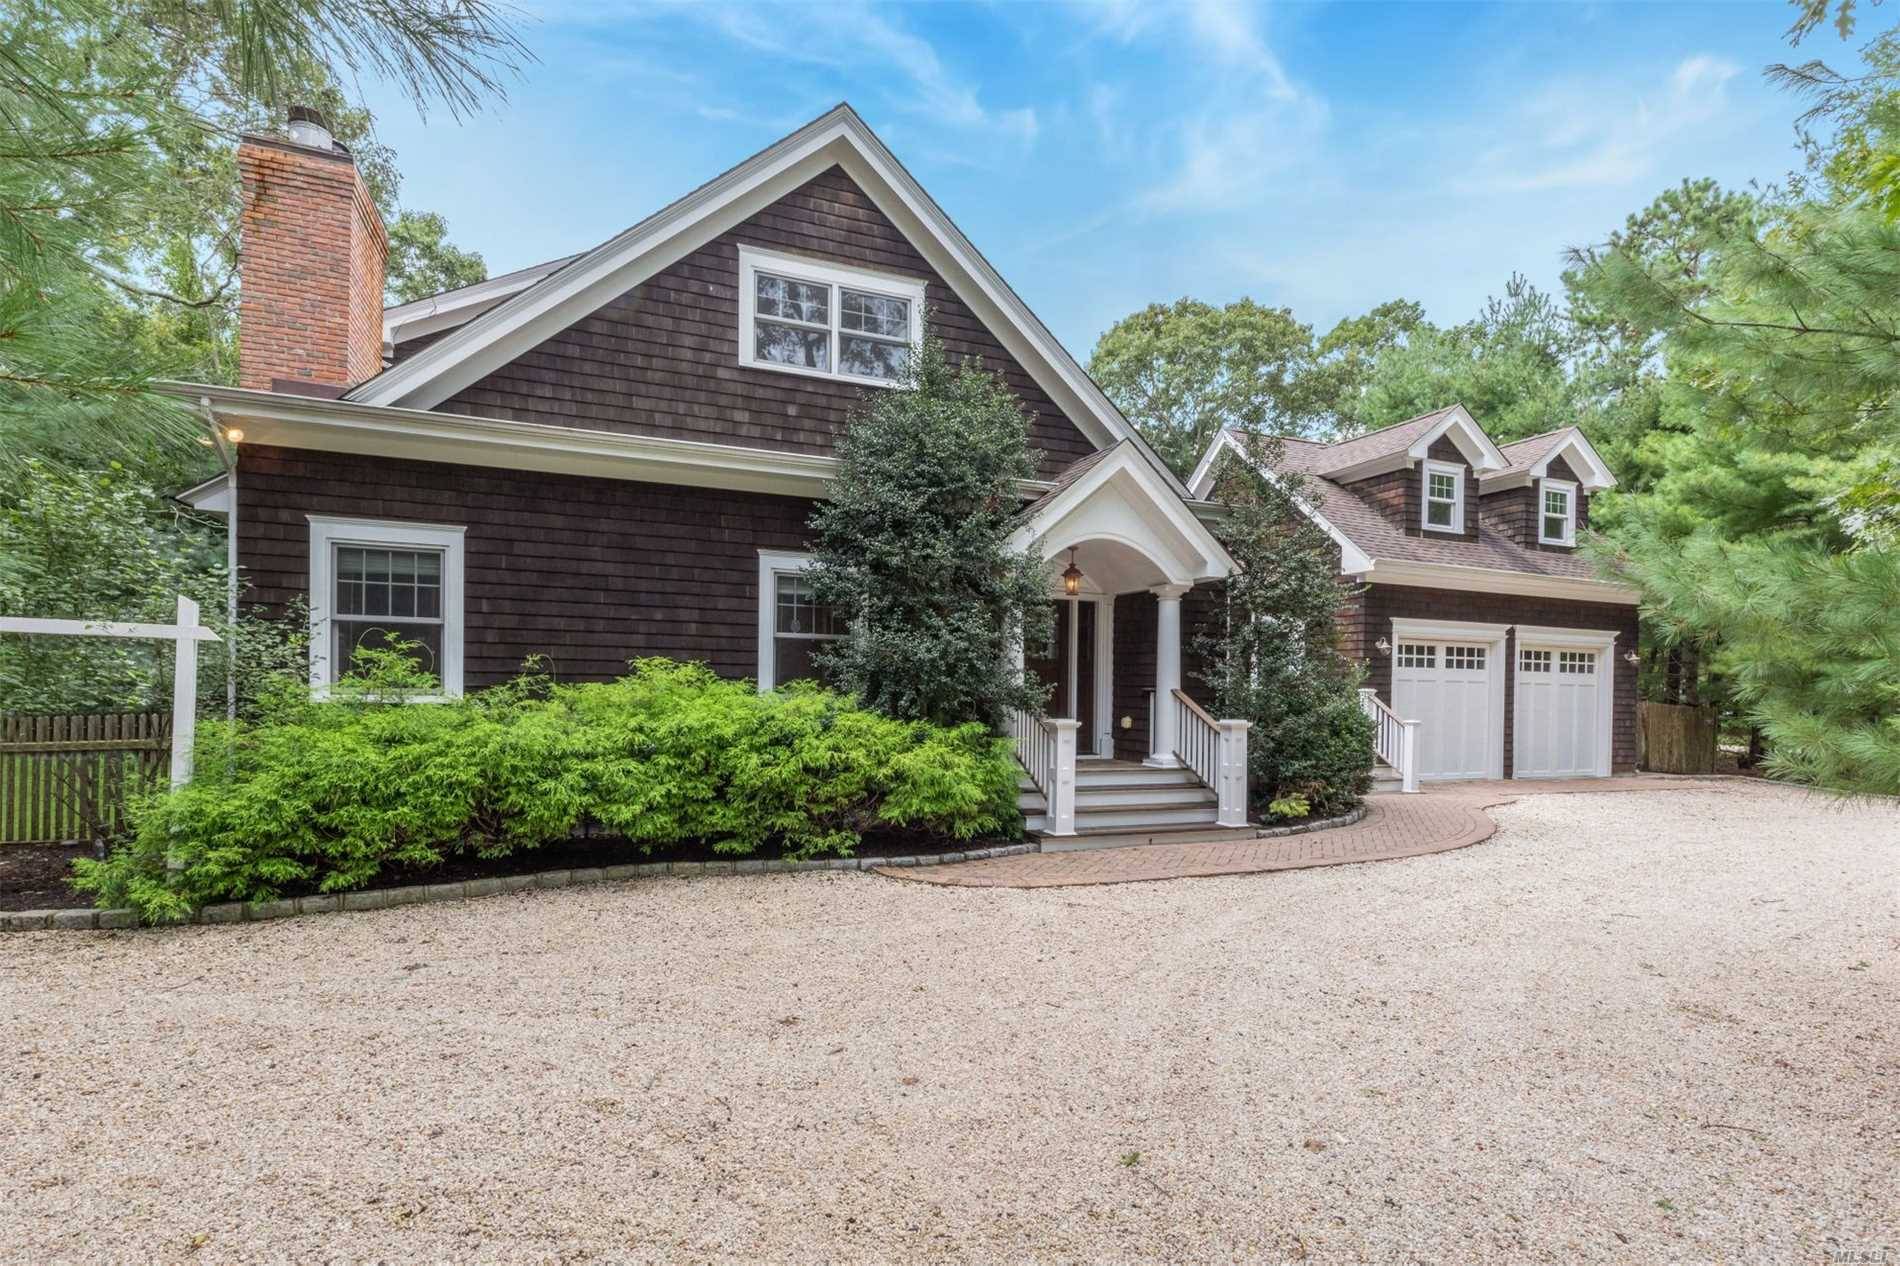 TURN KEY QUOGUE BEACH FARMHOUSE with Immaculate Attention To Detail, Expansive Entertaining Spaces And Flawless Design Characteristics.